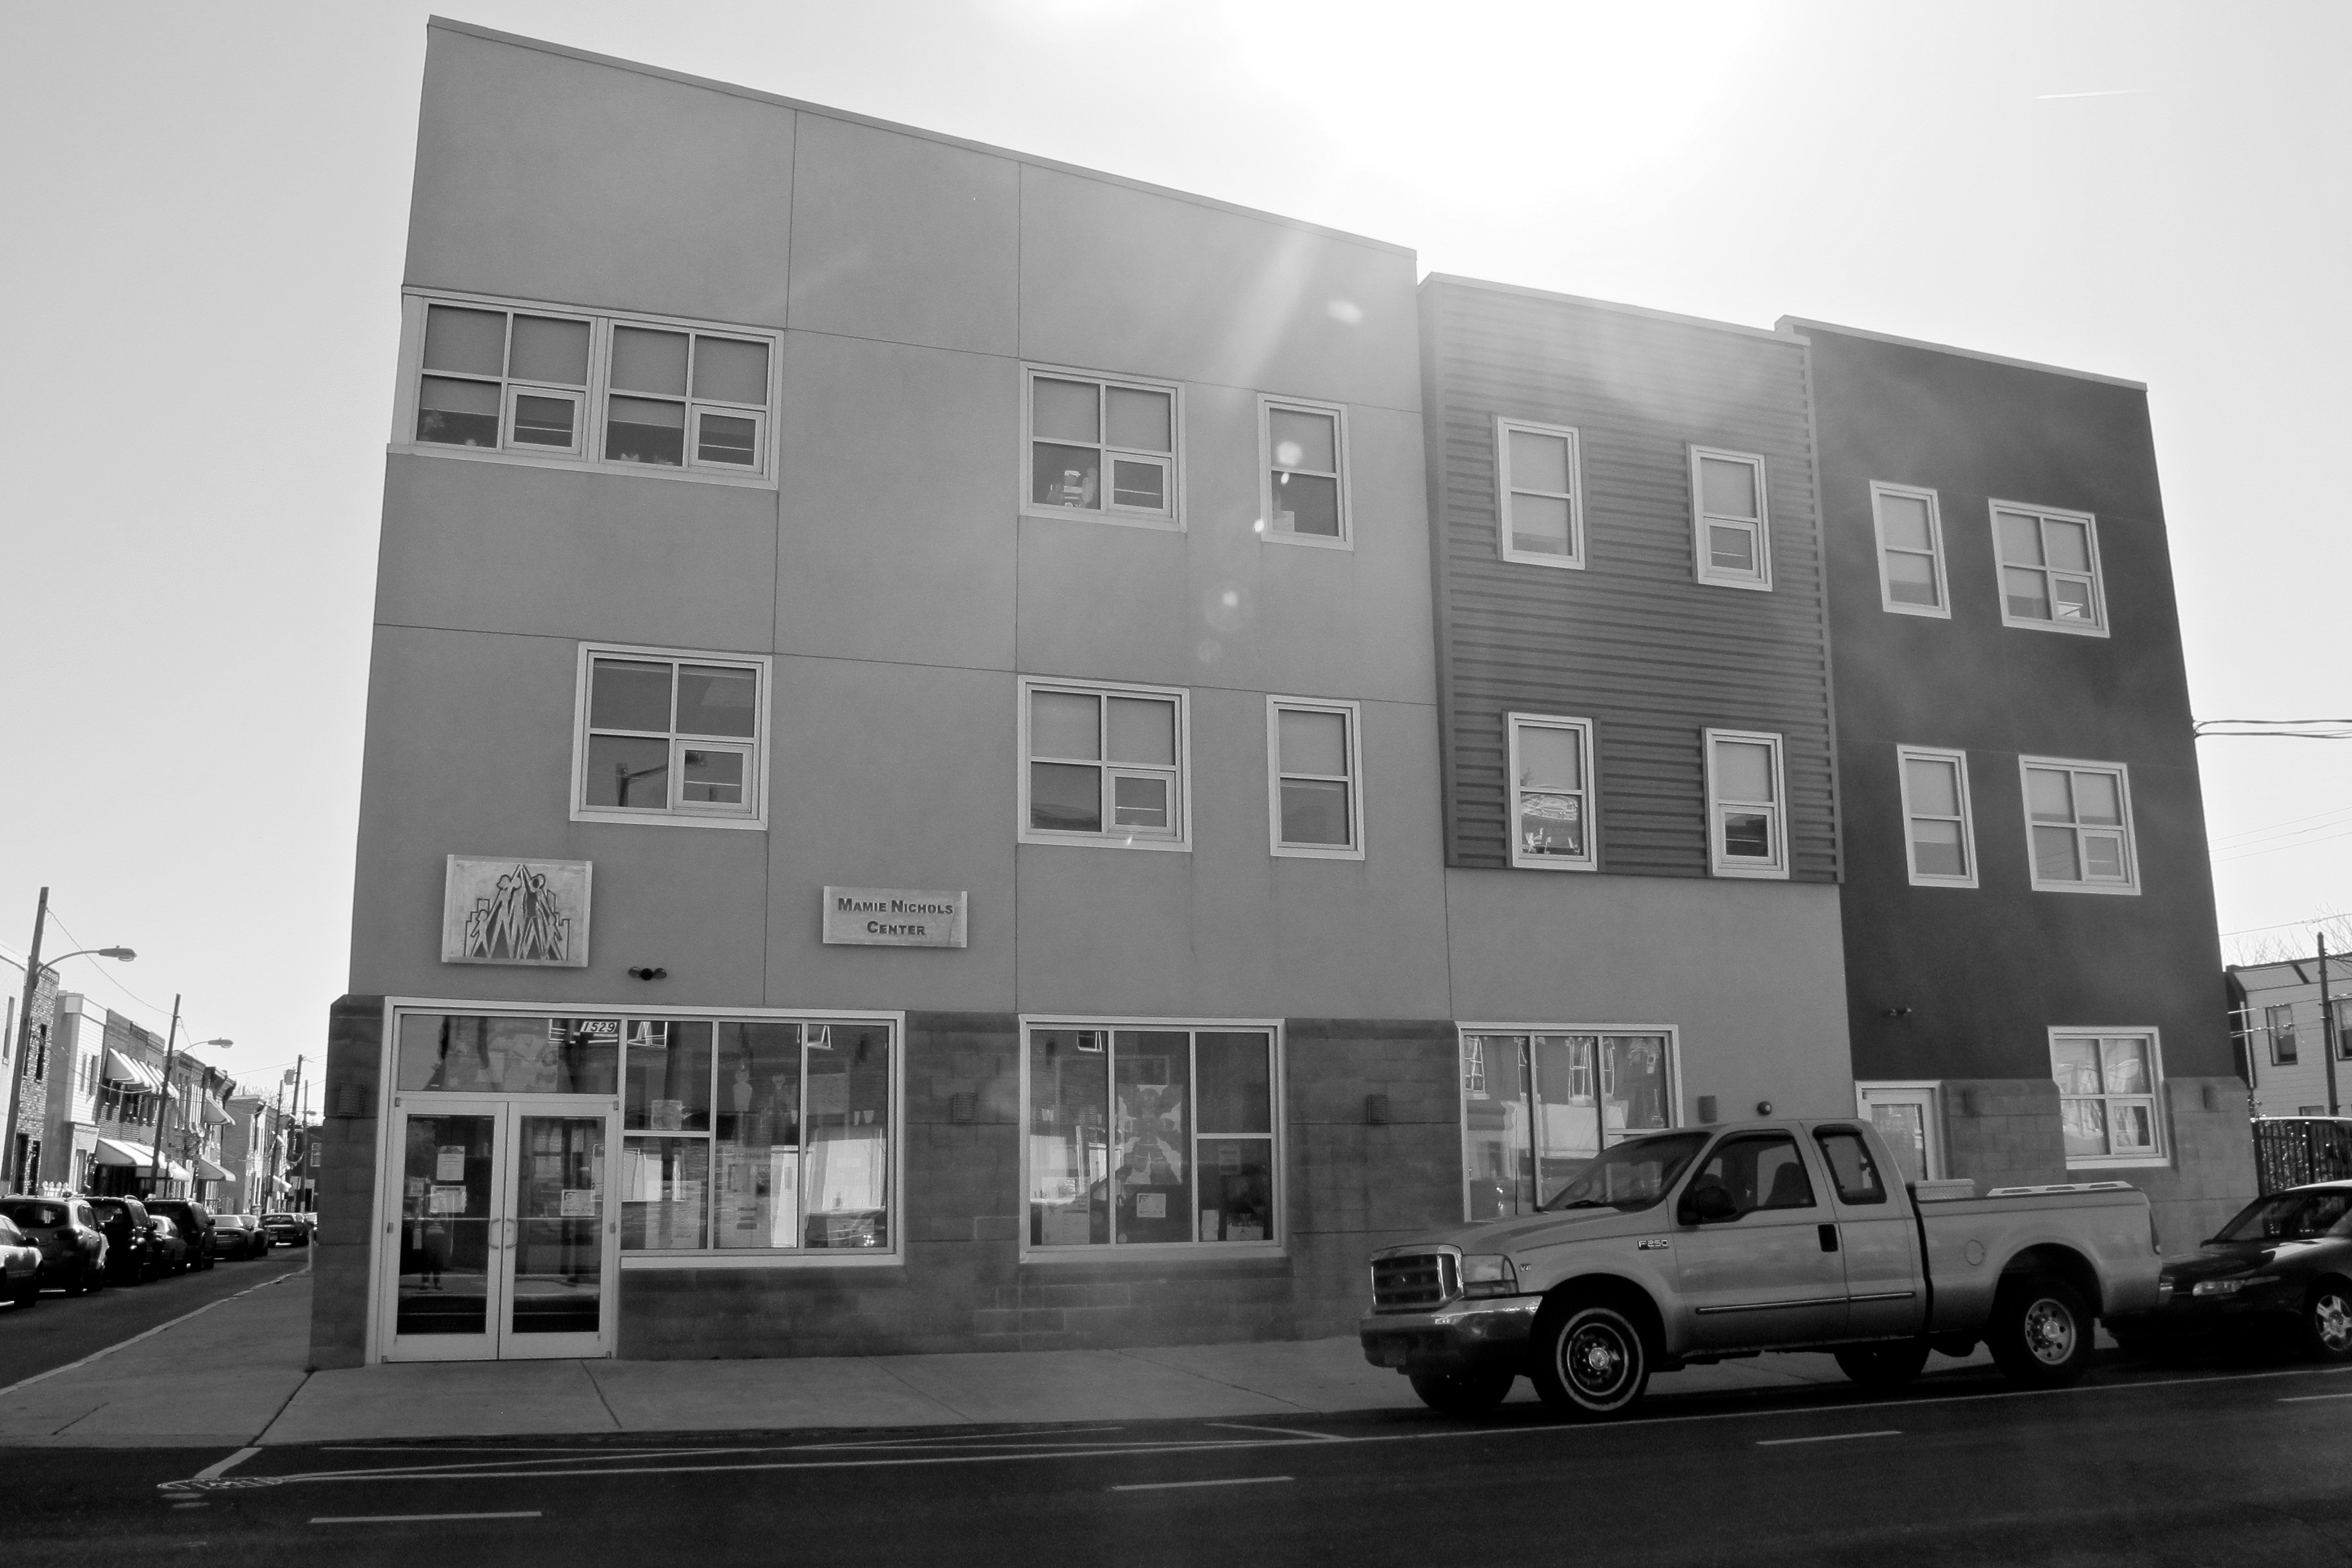 Under Cheryl Weiss, Diversified Community Services moved its headquarters to a new building at 22nd Street and Point Breeze Avenue.